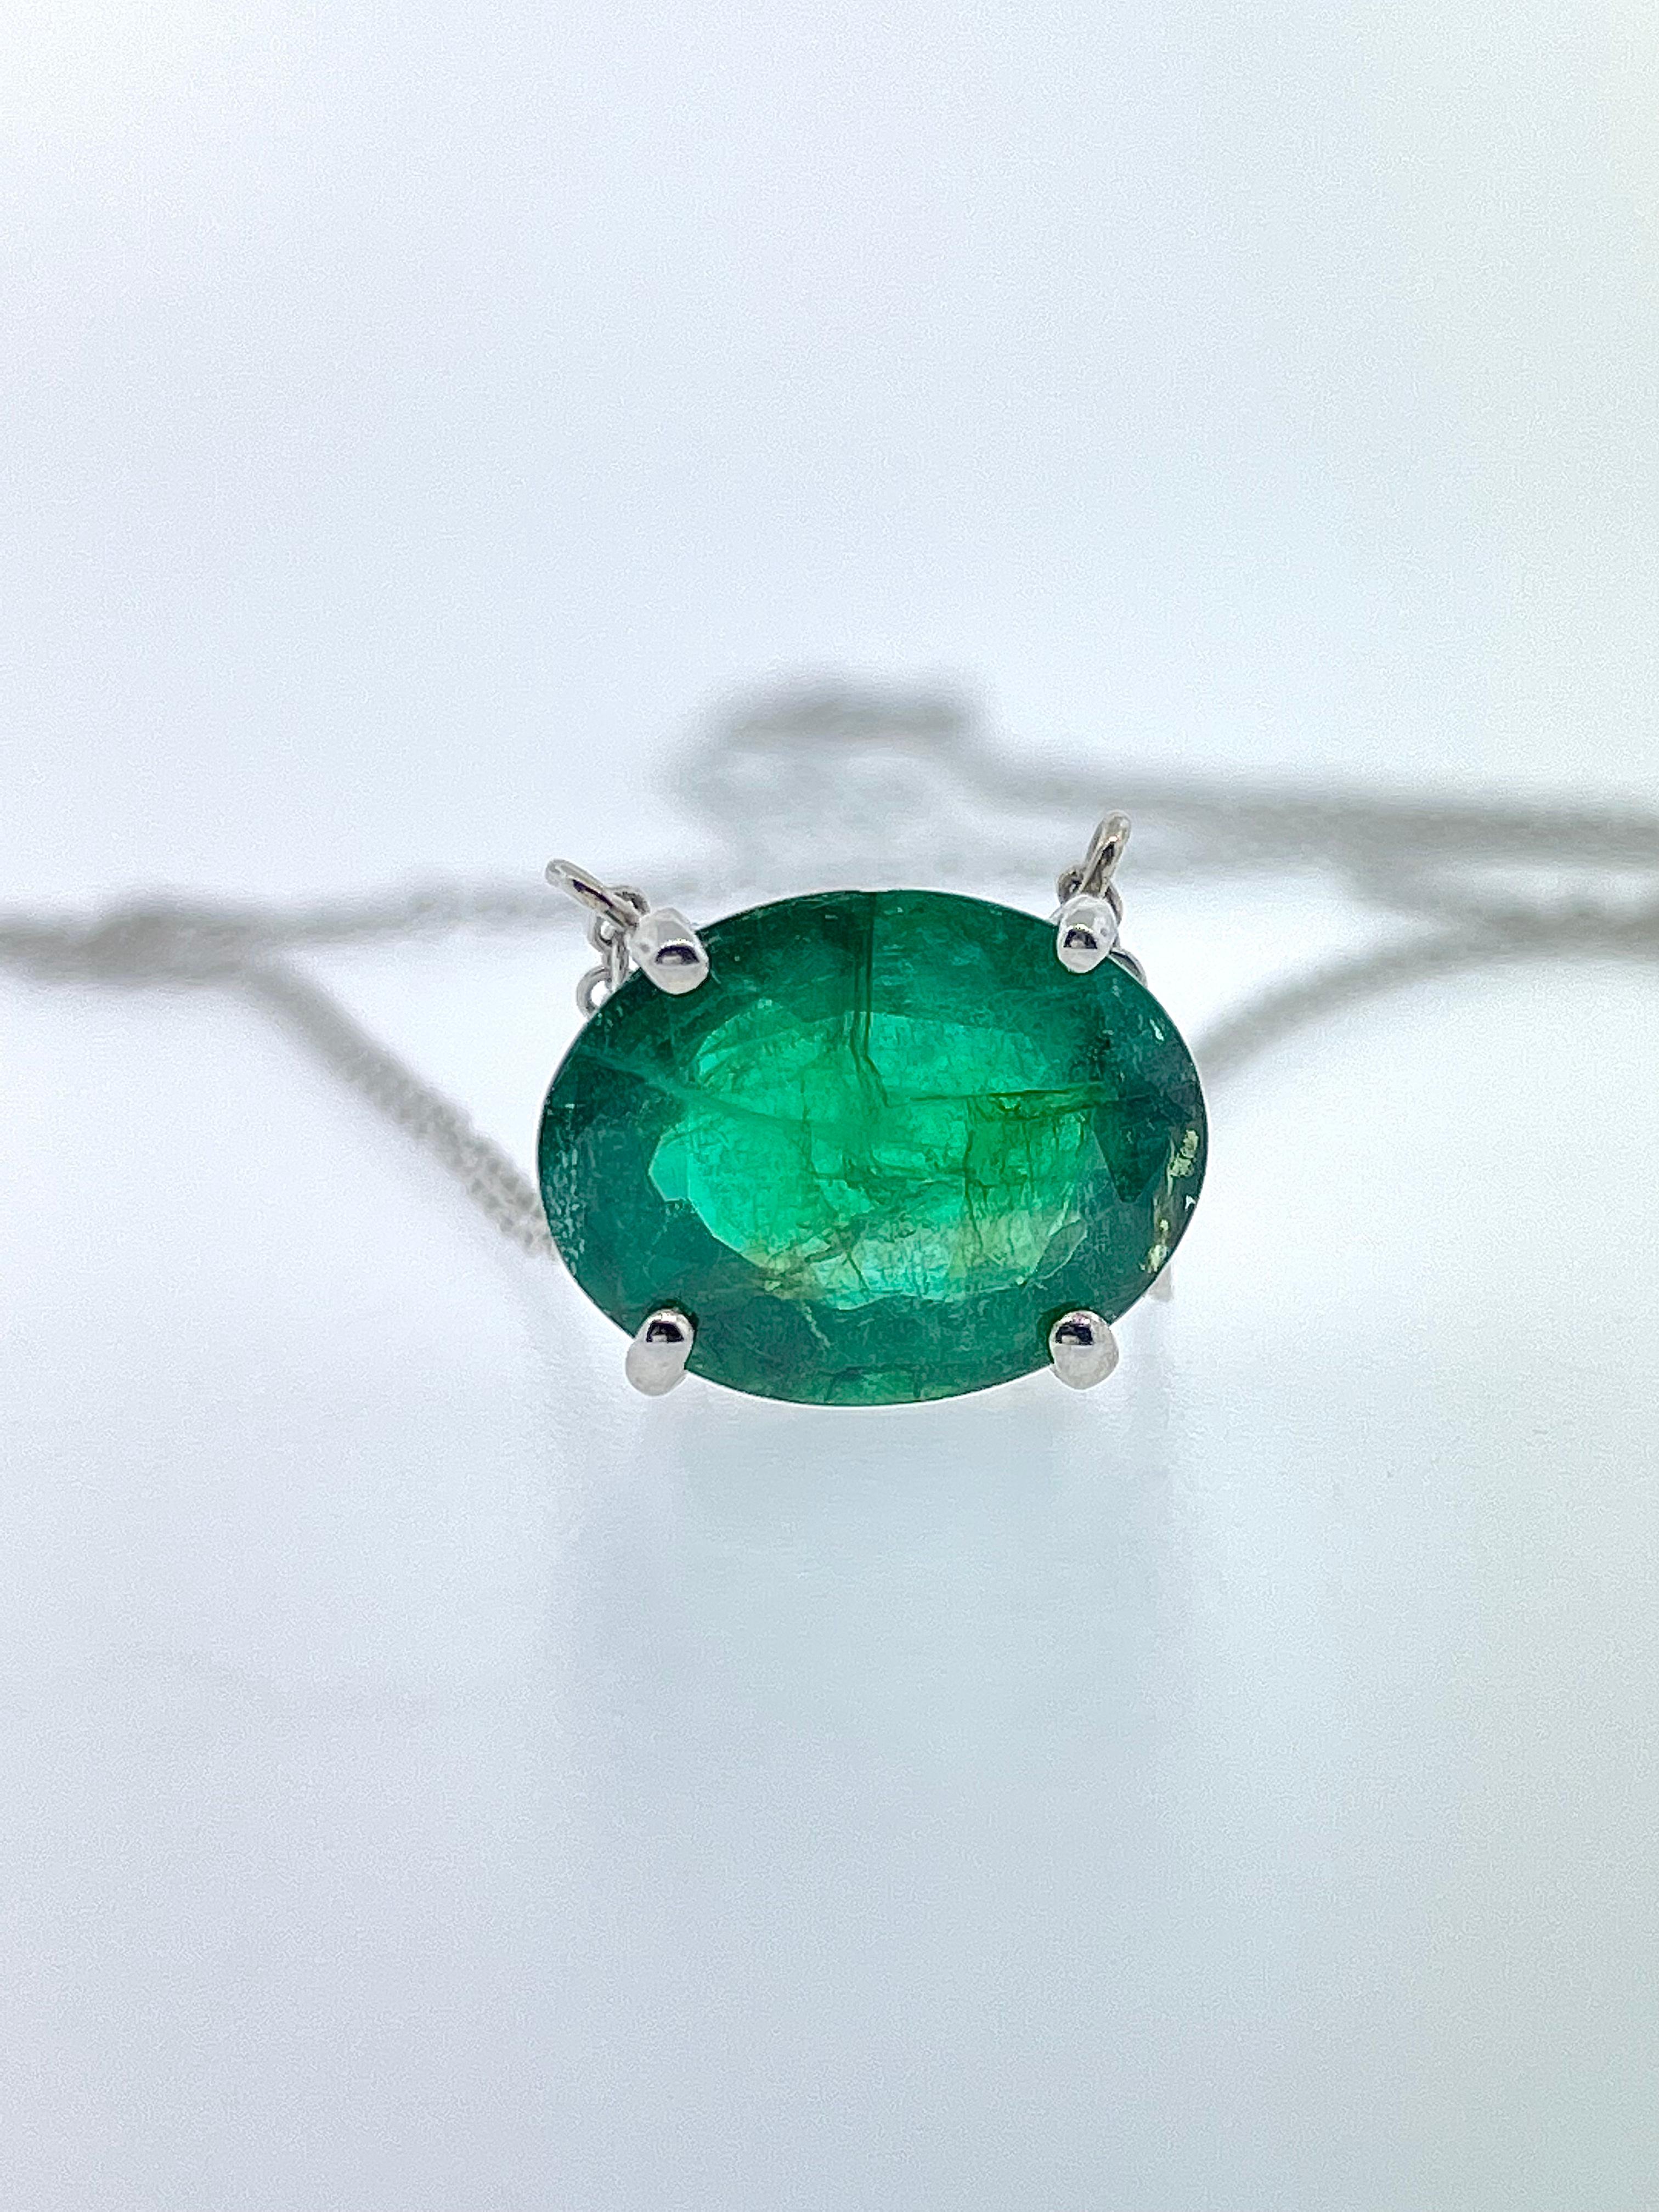 This beautiful necklace contains one oval green emerald weighing 6.96 carat total weight set in a four-prong basket. It is attached to a 17